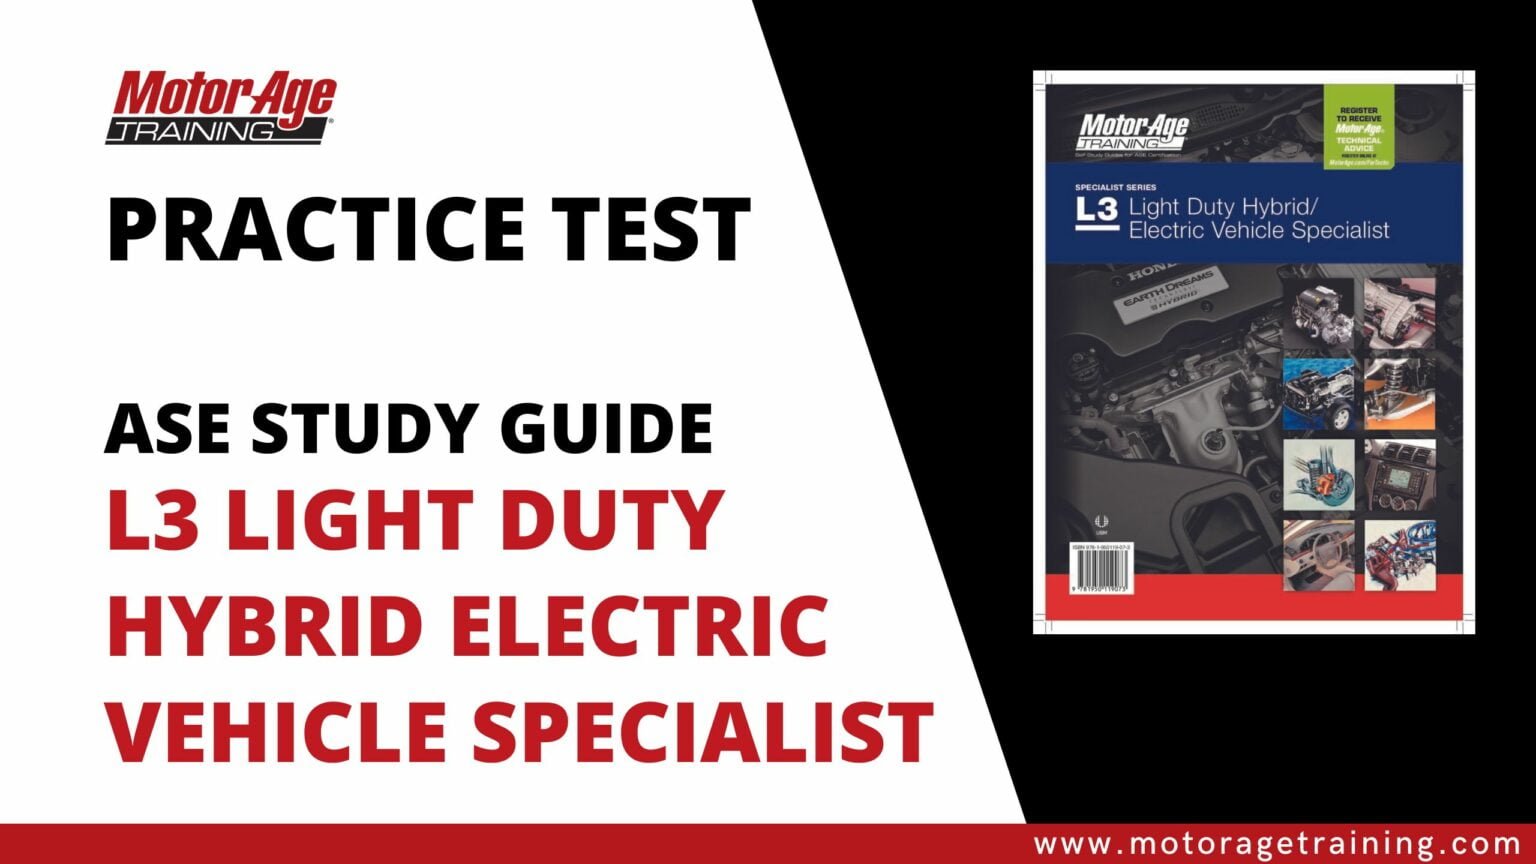 ASE Study Guide L3 Light Duty Hybrid Electric Vehicle Specialist